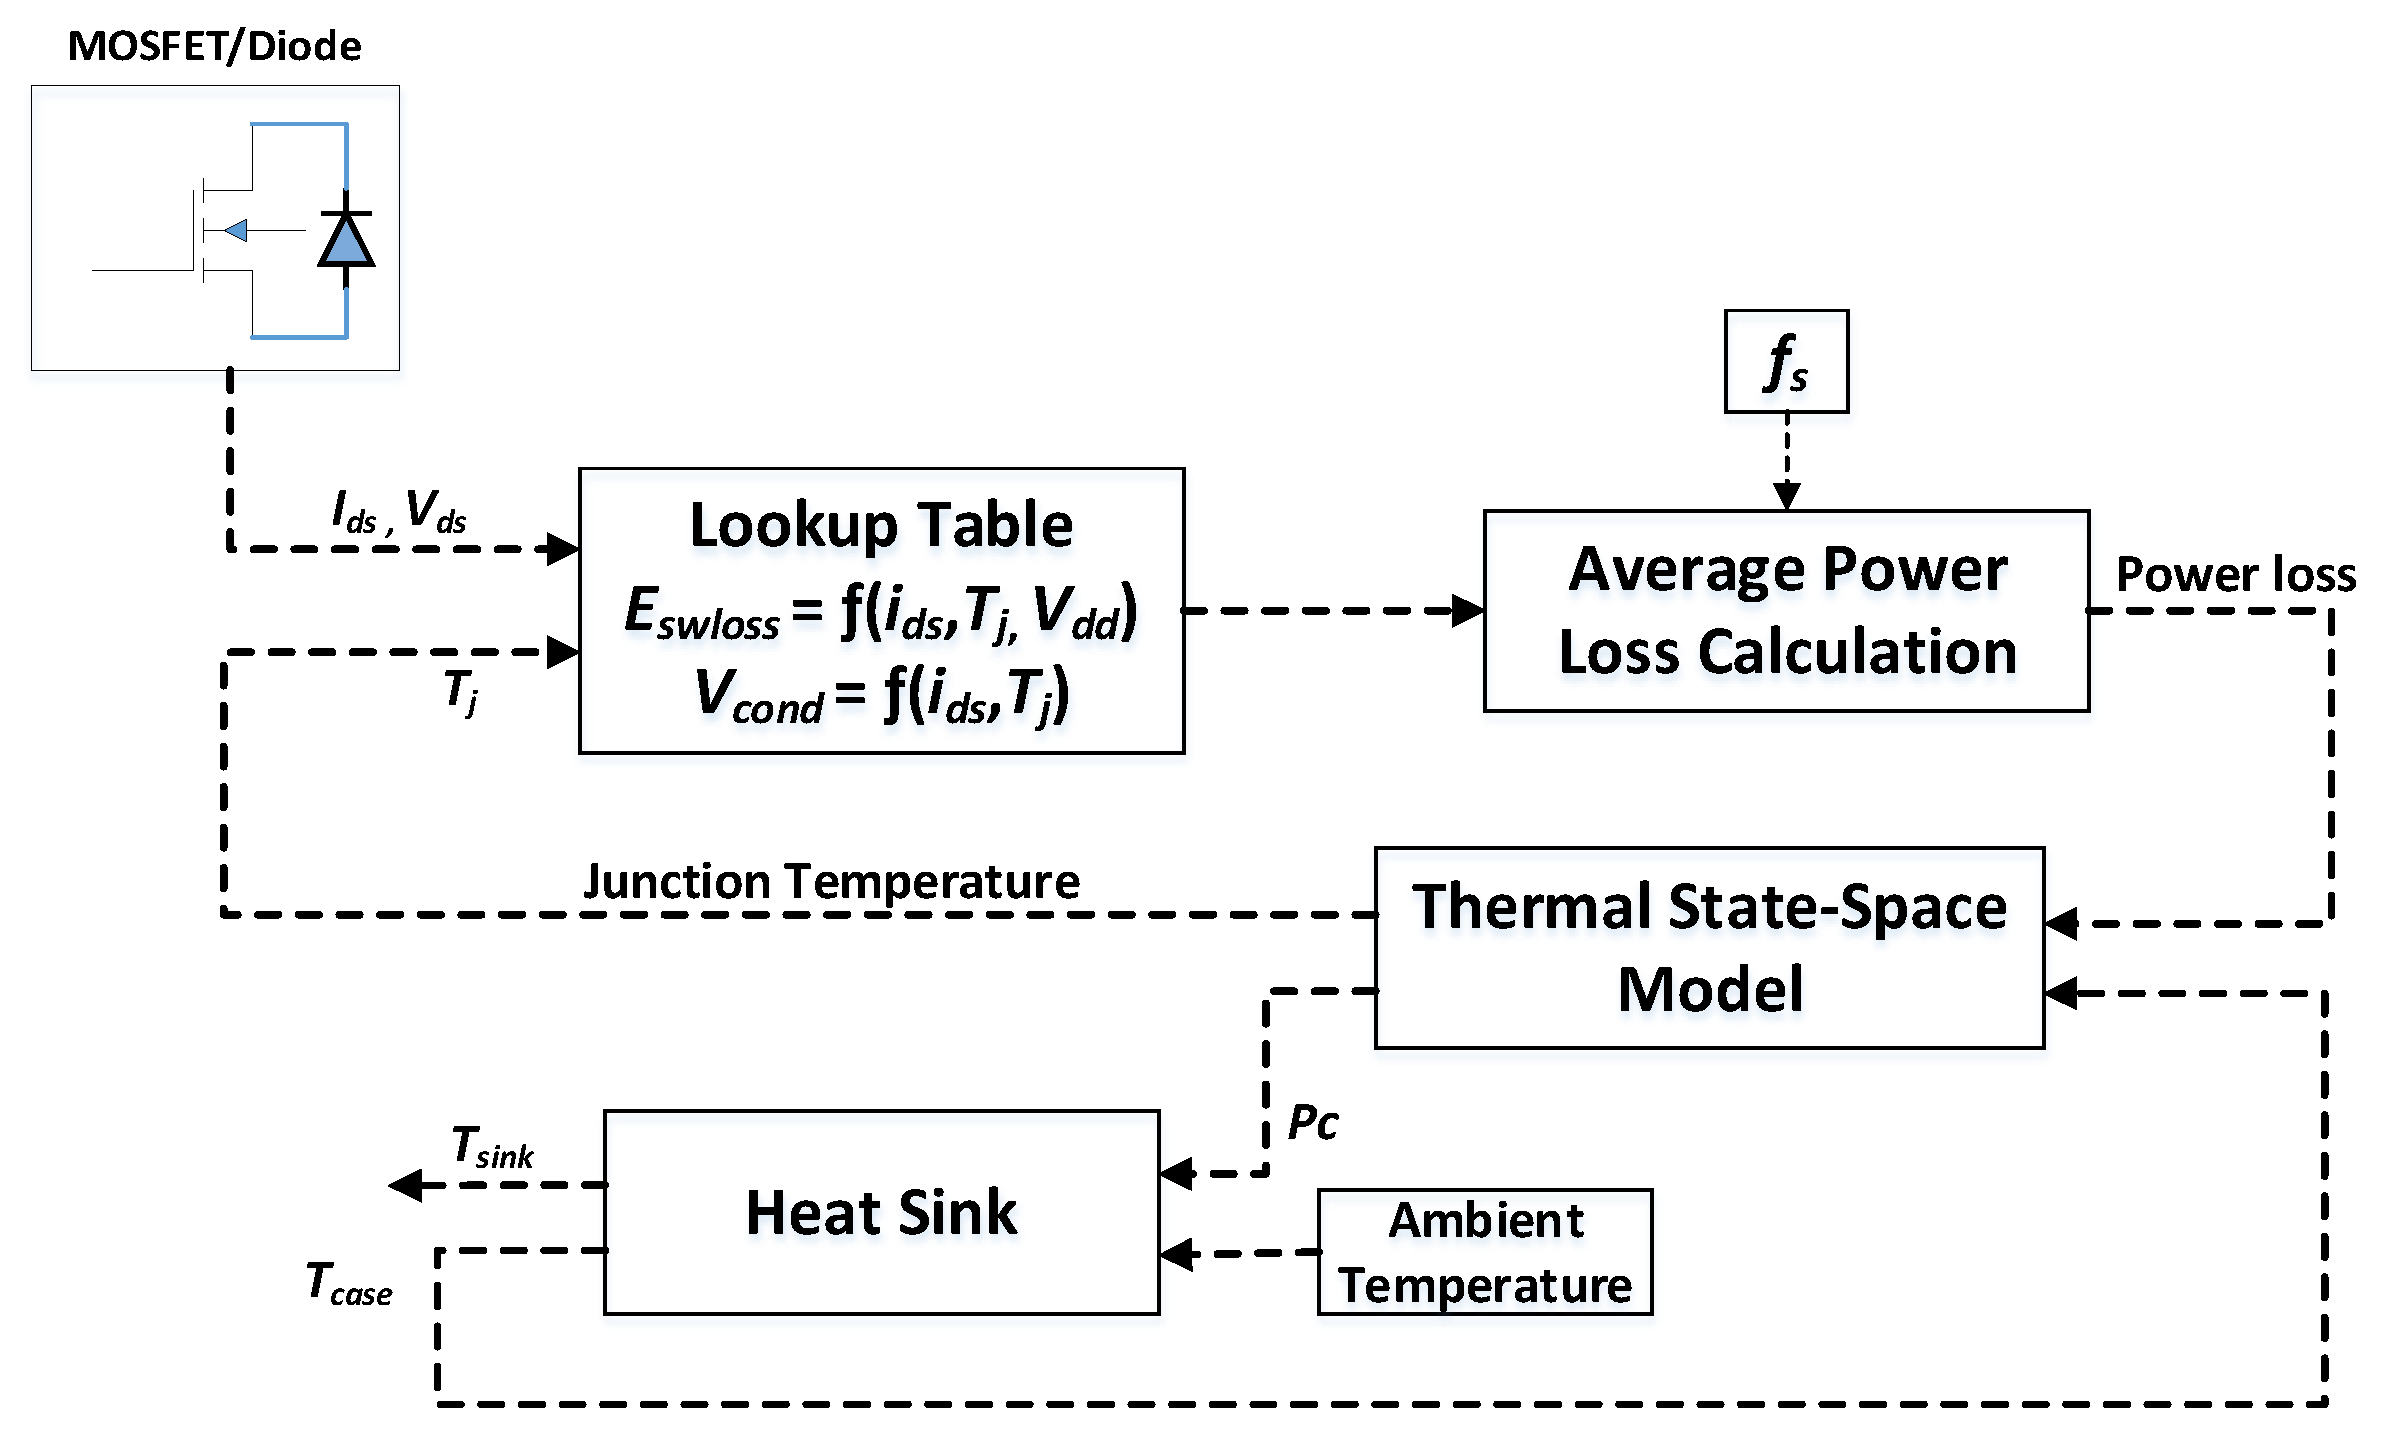 Applied Sciences | Free Full-Text | Accurate Electro-Thermal Computational  Model Design and Validation for Inverters of Automotive Electric Drivetrain  Applications | HTML